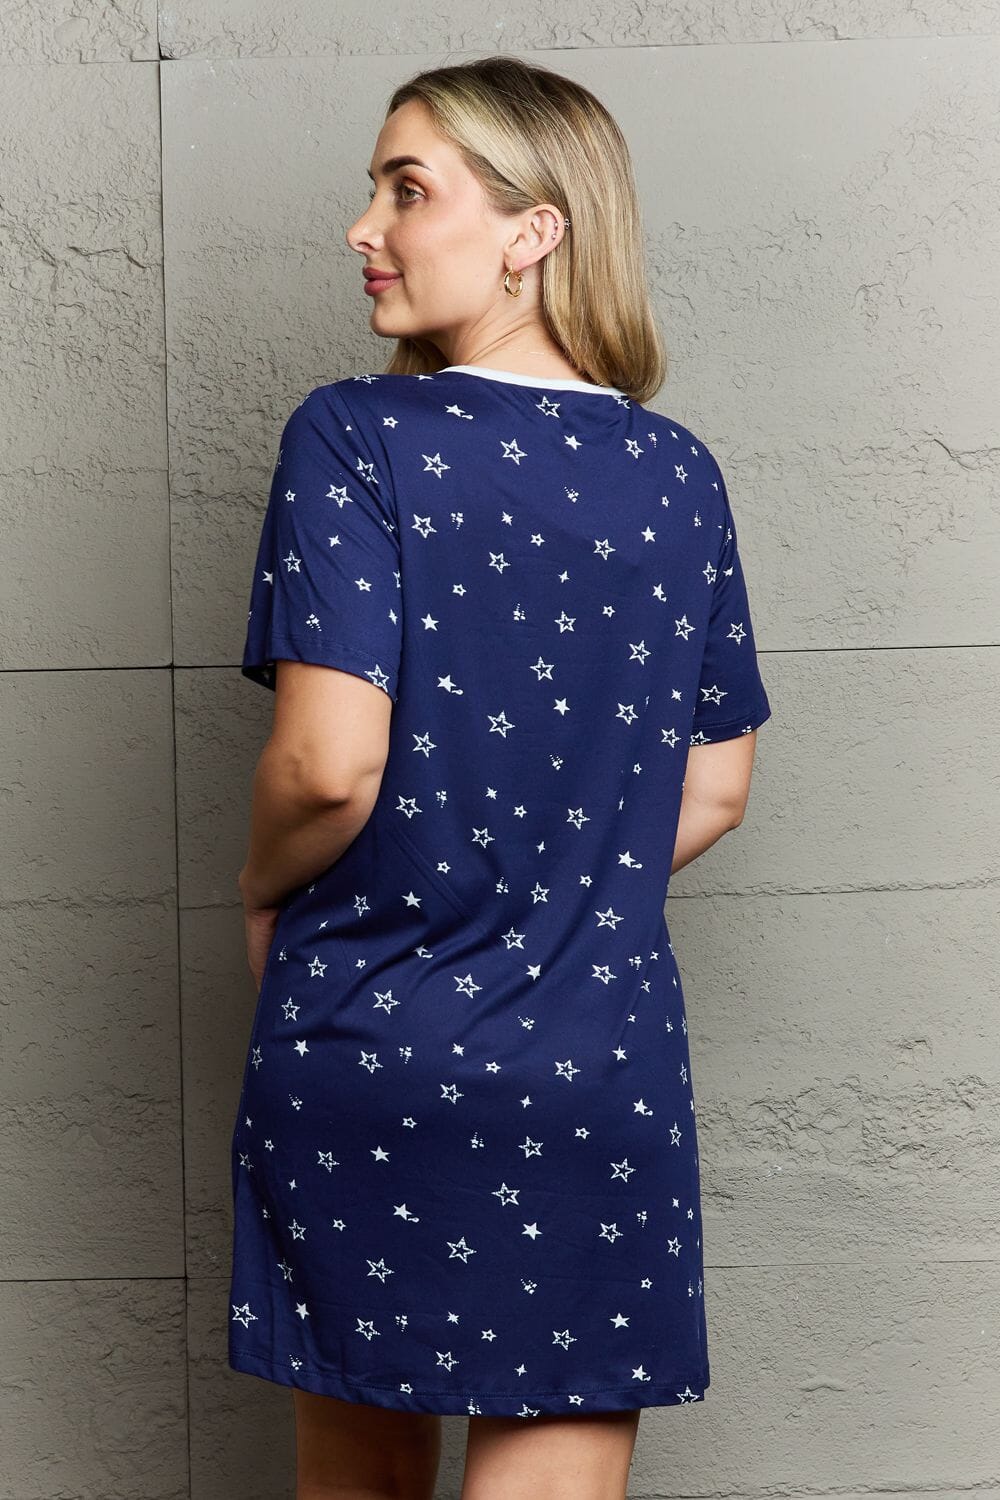 MOON NITE Navy Blue V neck Short Sleeves Quilted Quivers Button Down Sleepwear Stretchy Dress Sleepwear & Loungewear jehouze 